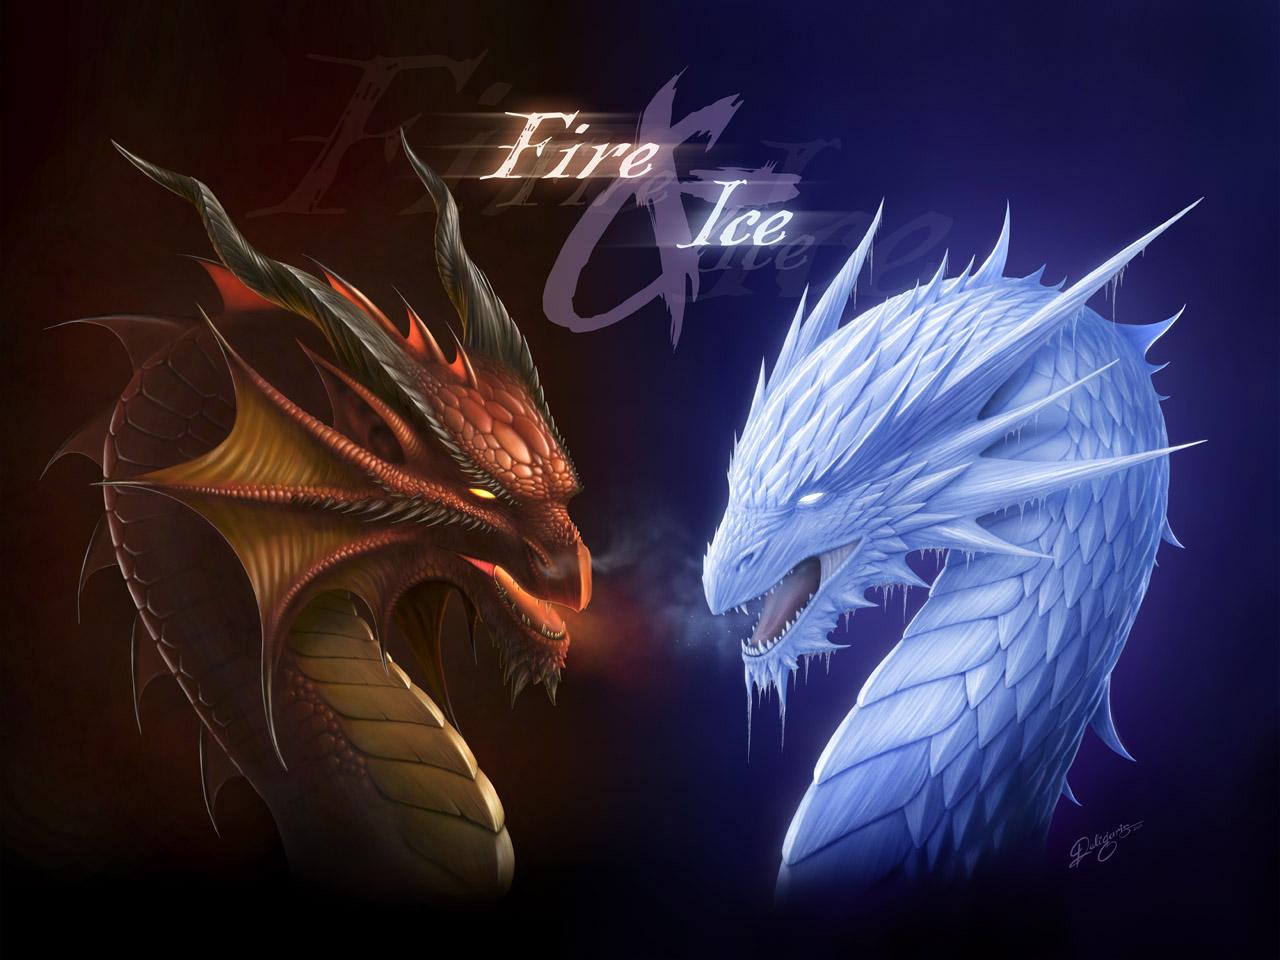 Fire and Ice Dragons wallpaper from Dragons wallpaper